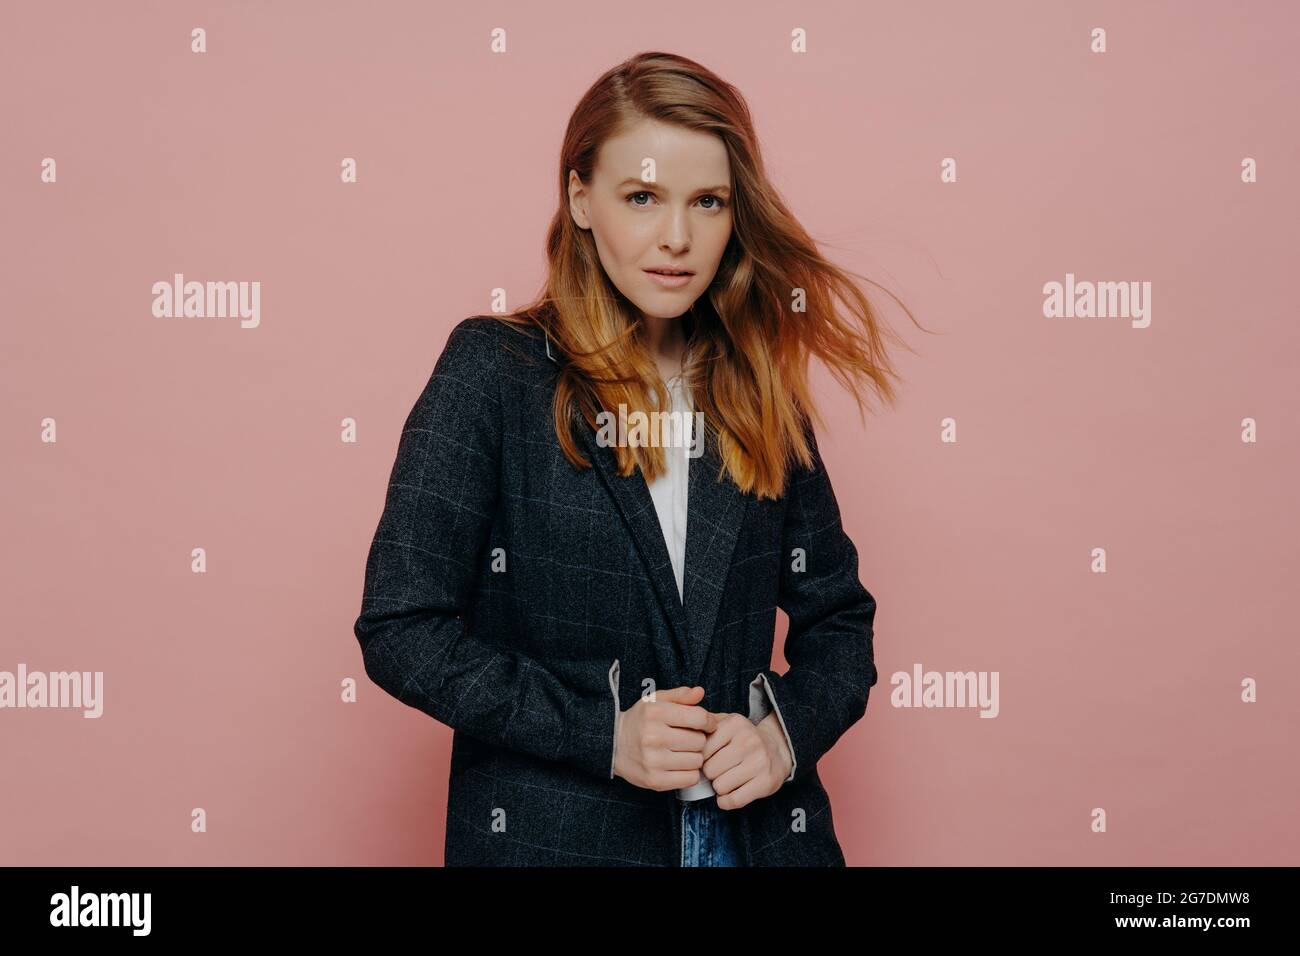 Beautiful young woman with ginger hair in formal jacket posing against pink wall Stock Photo